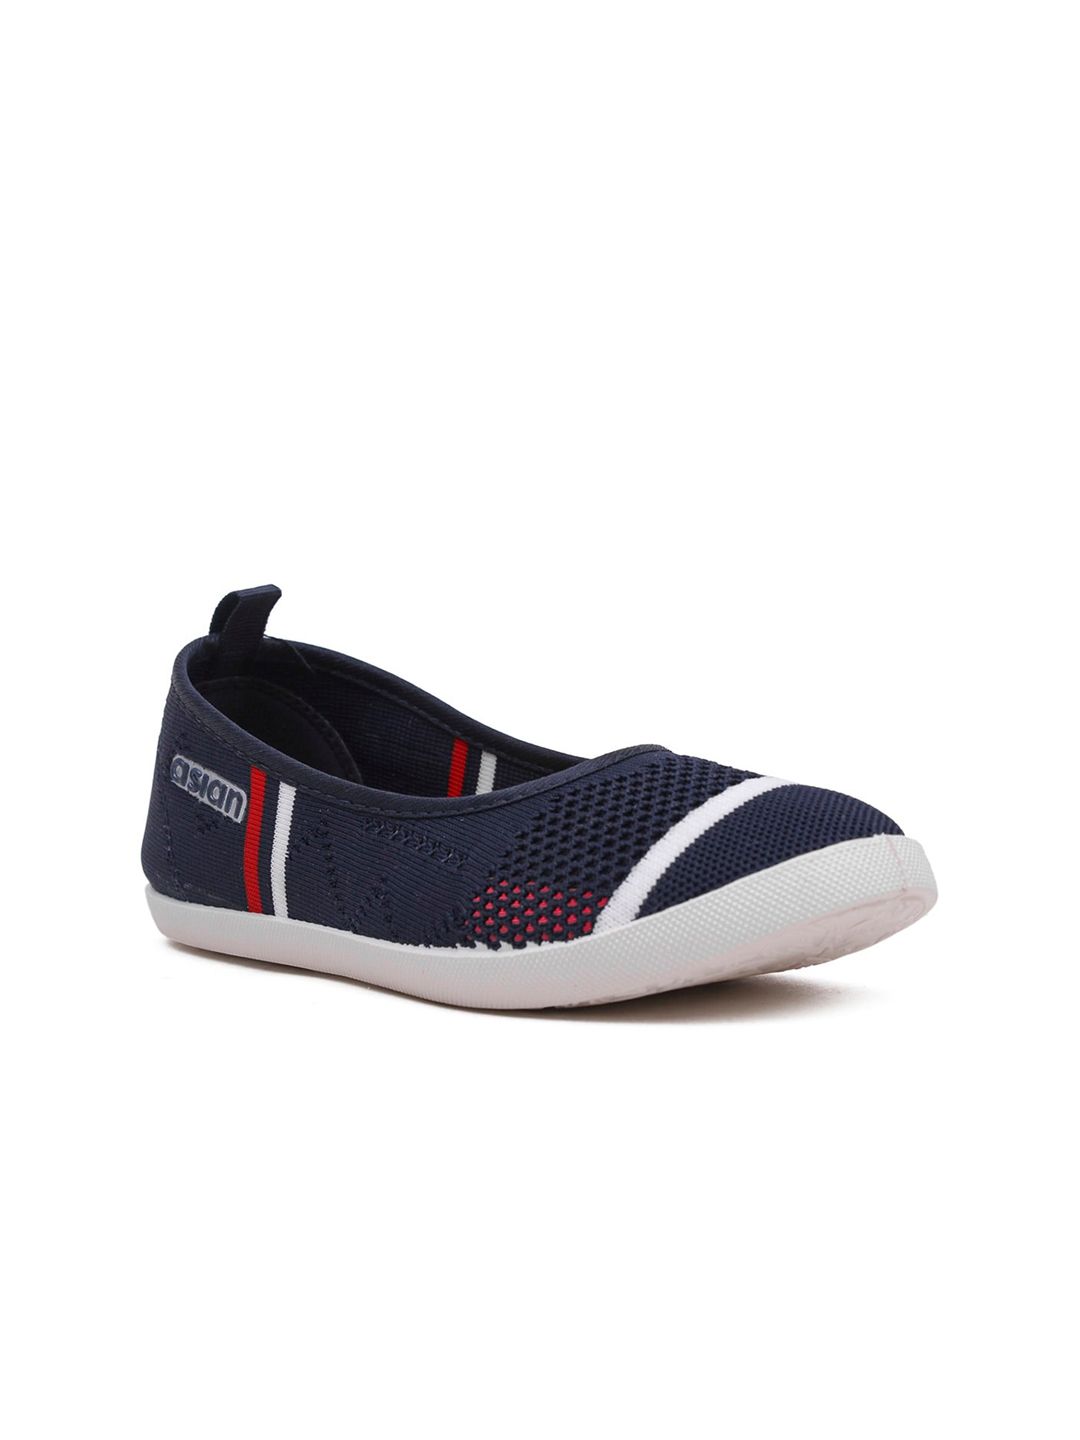 ASIAN Women Navy Blue & Red Woven Design Slip-On Sneakers Price in India